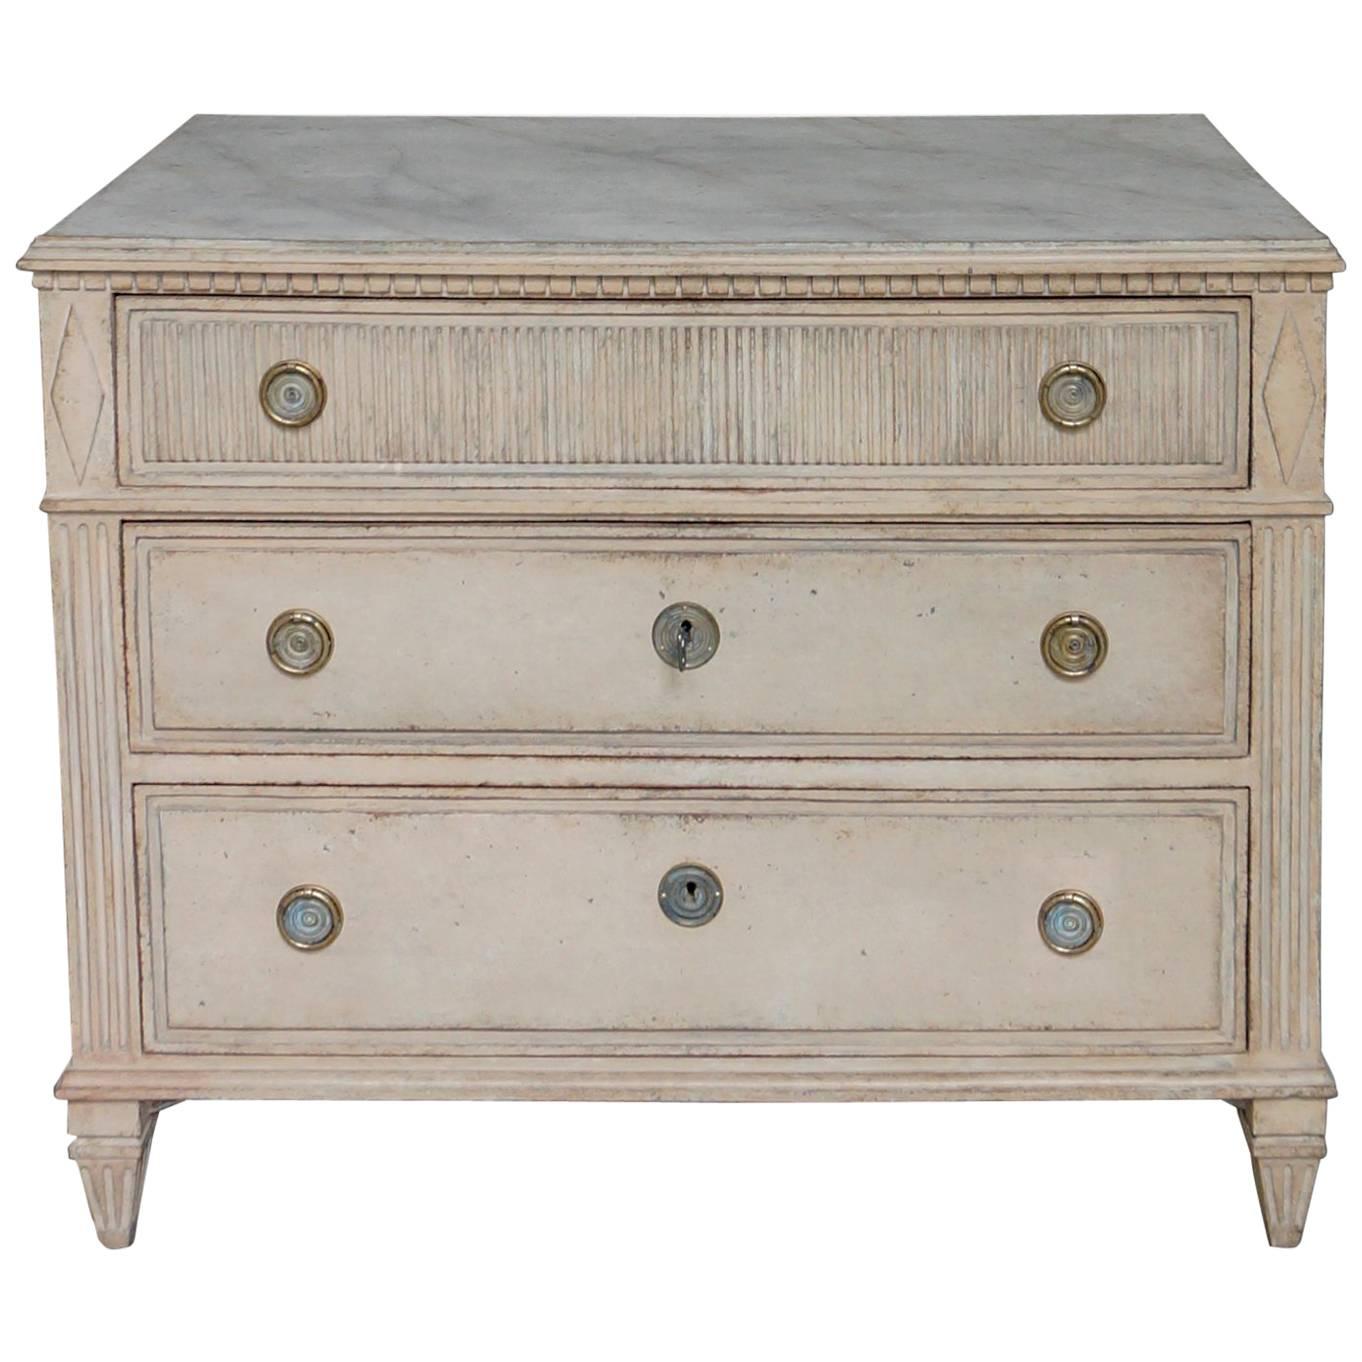 Empire Chest of Drawers with Marbled Top